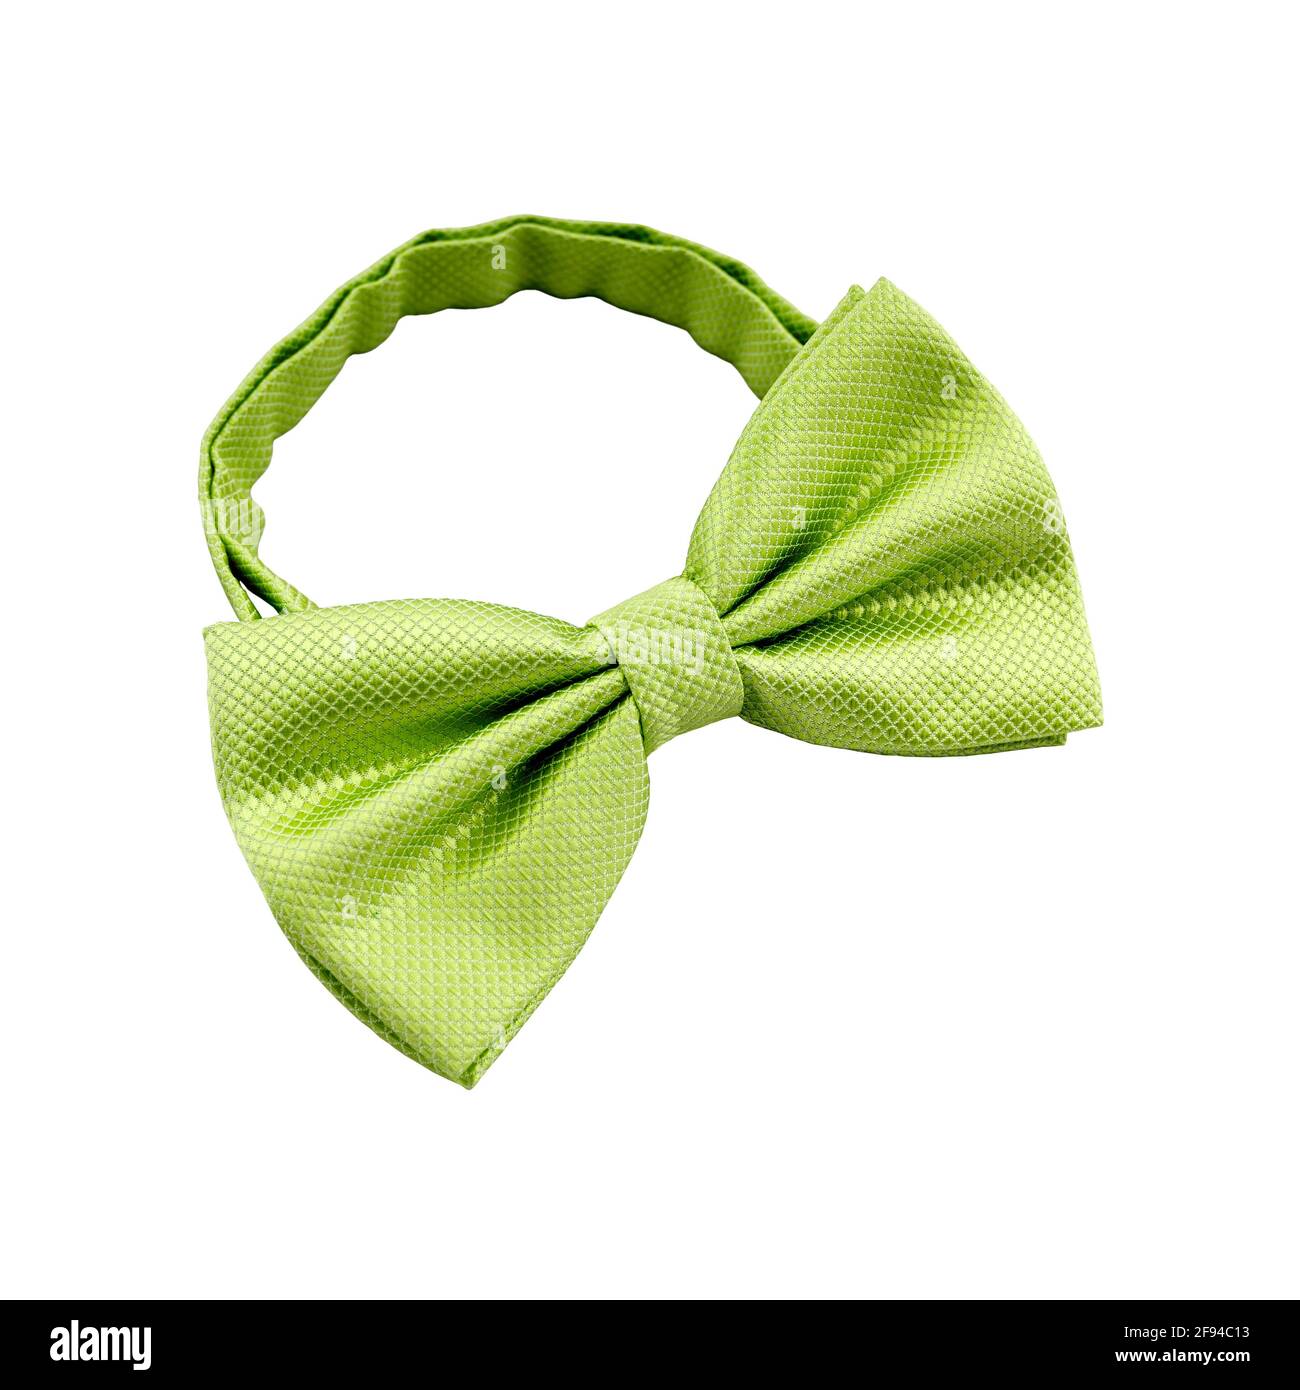 Light green bow tie isolated on white background. Men's accessory for wedding ceremony Stock Photo